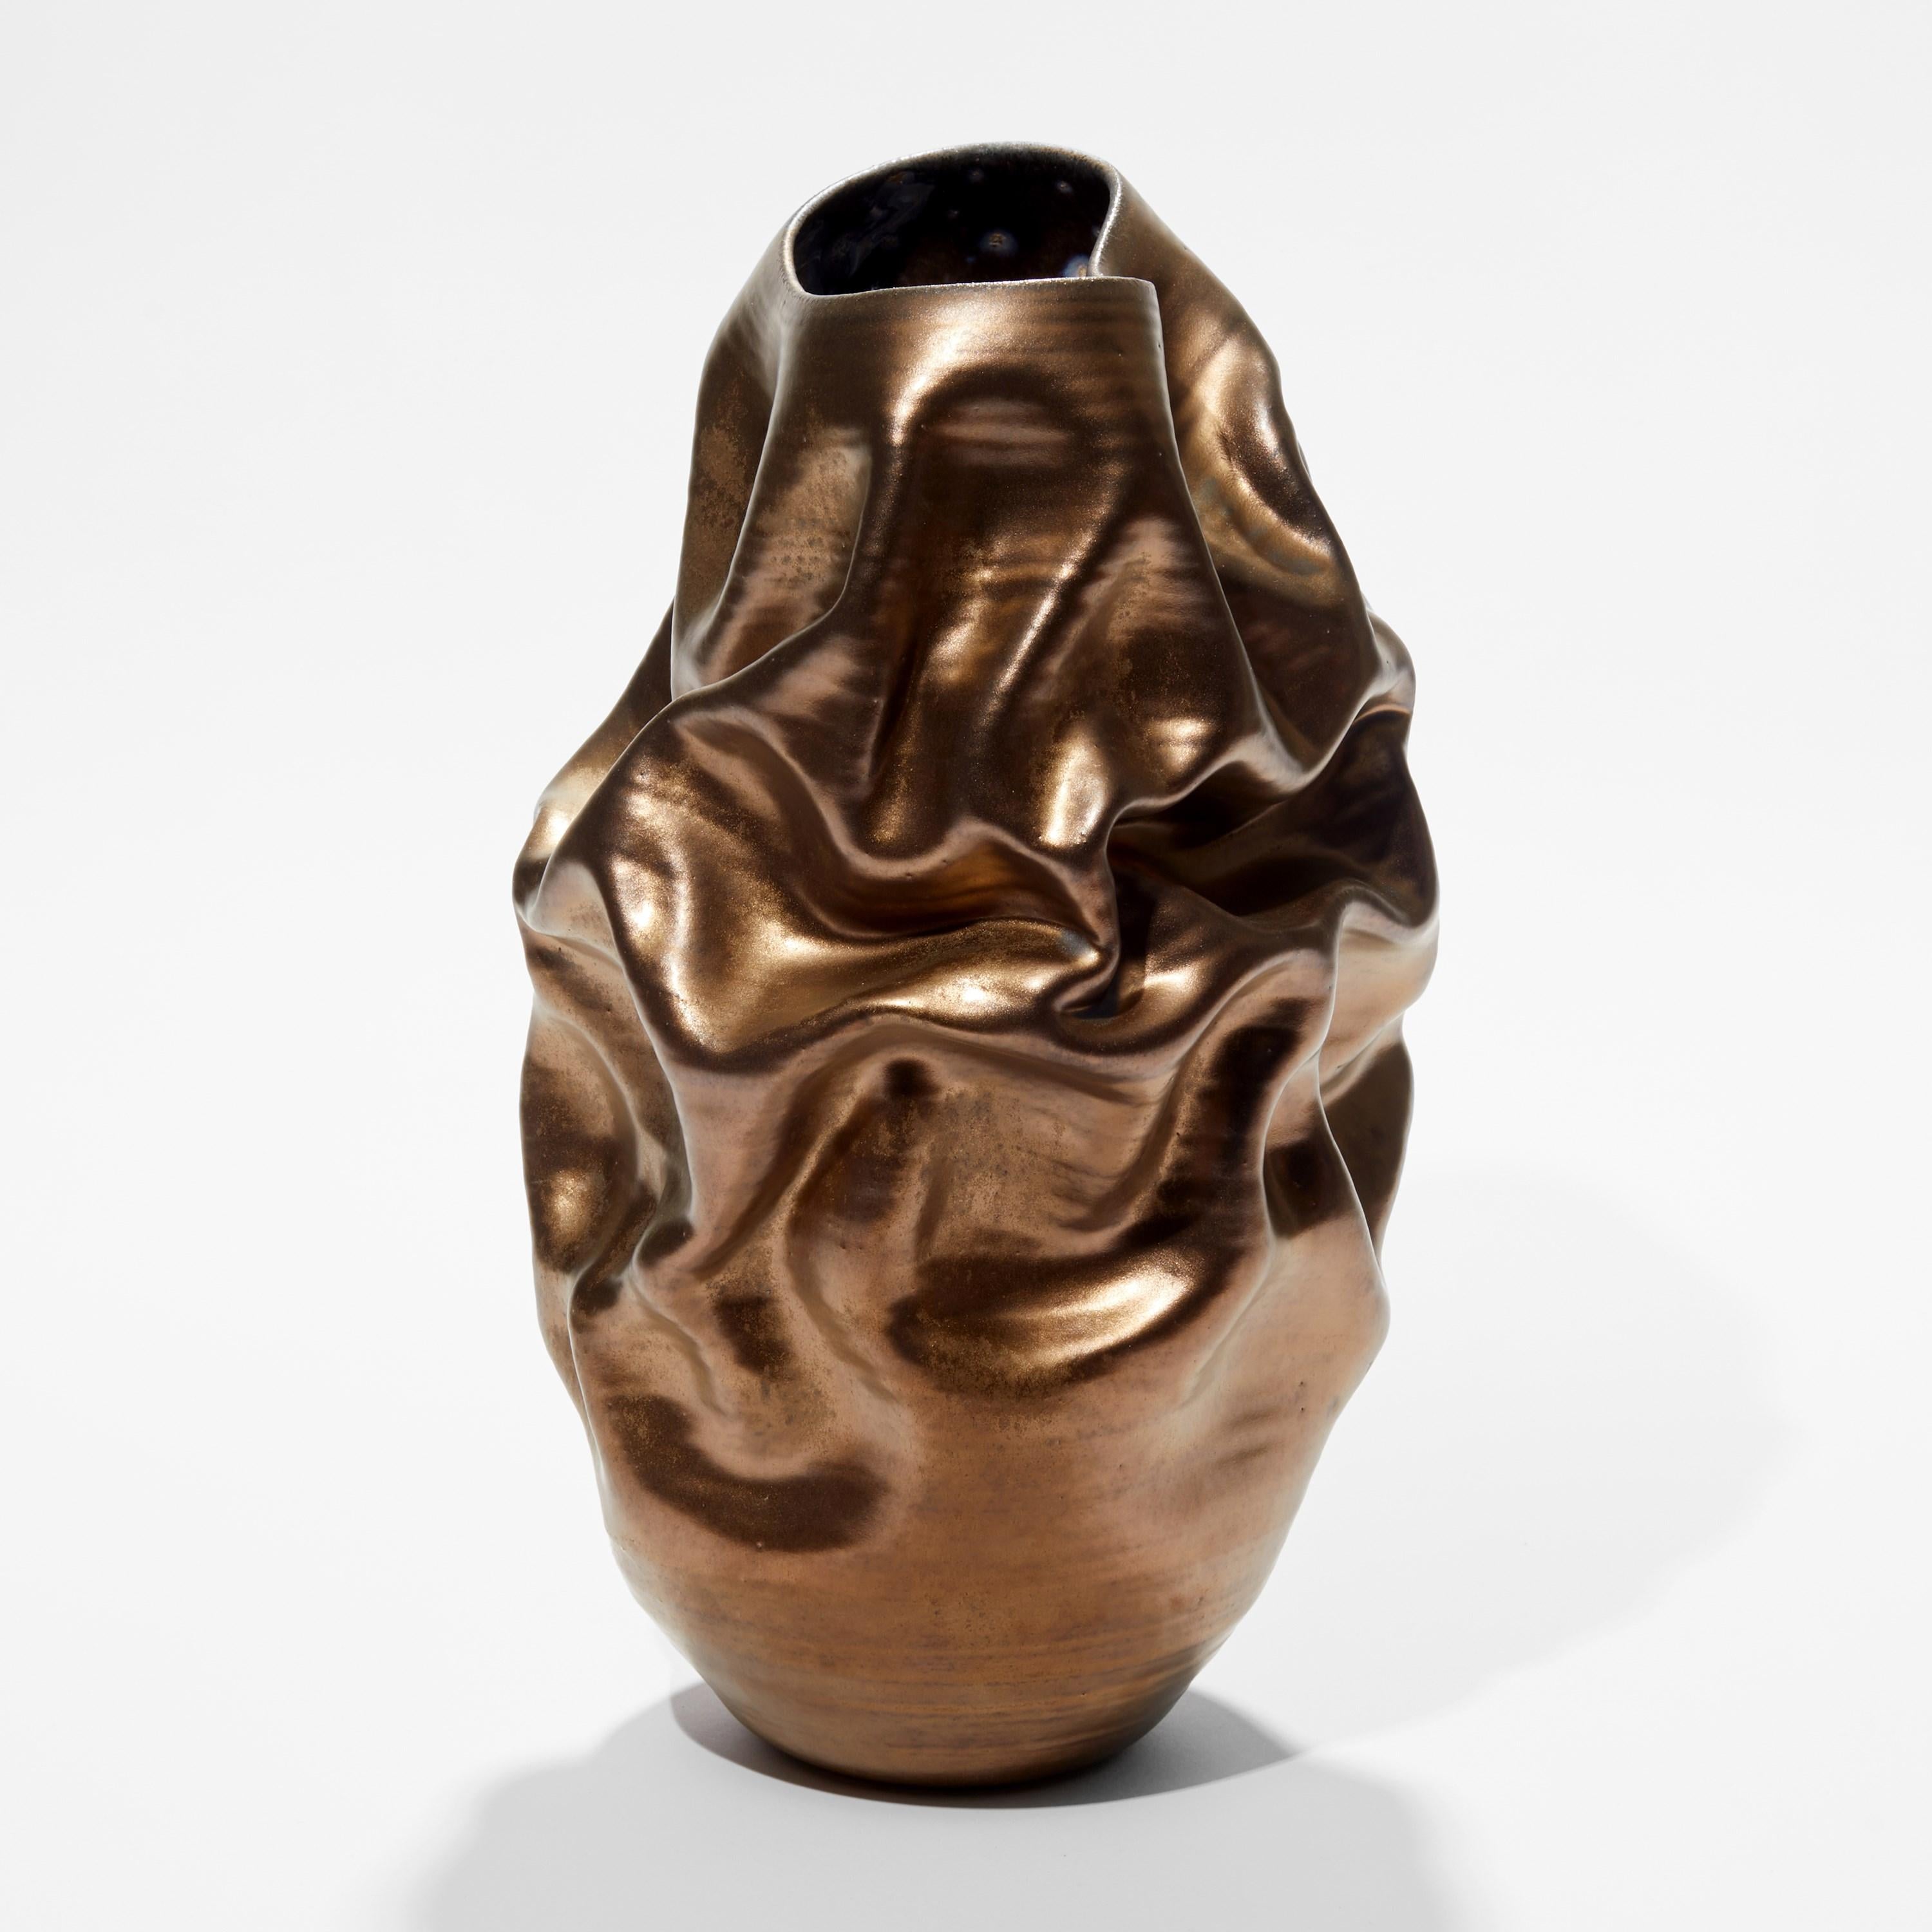 Hand-Crafted Tall Gold Crumpled Form No 96, a Ceramic Vessel by Nicholas Arroyave-Portela